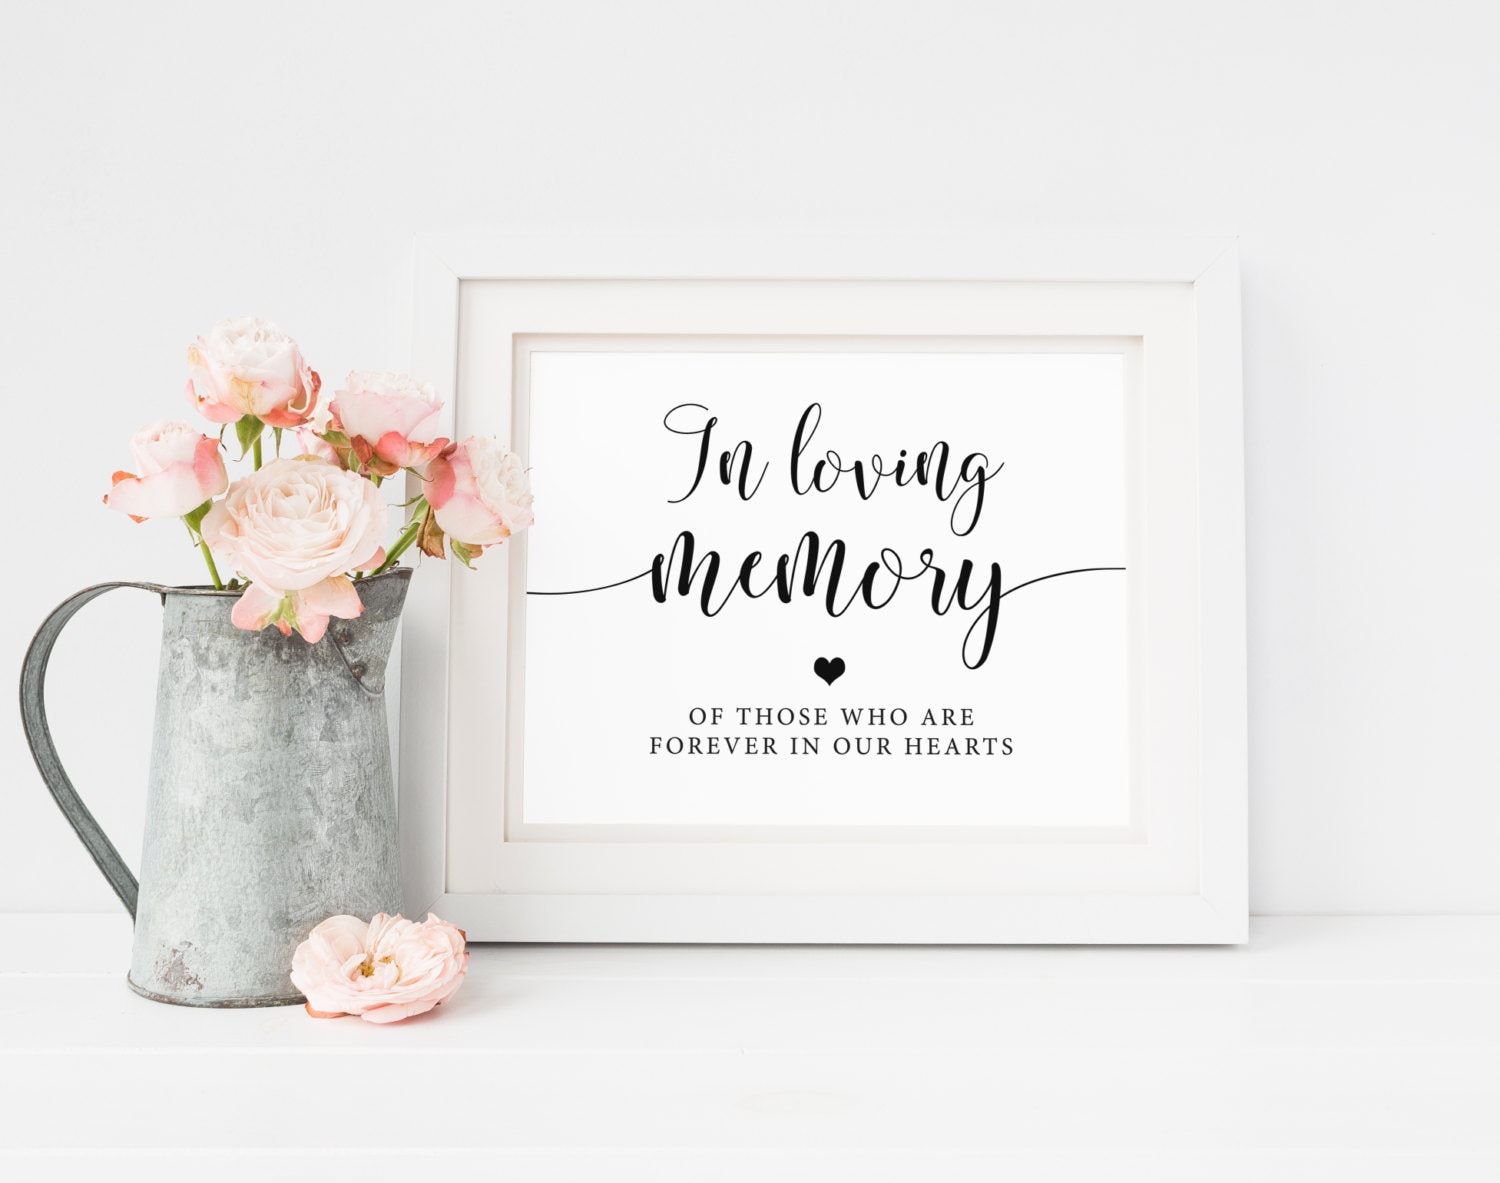 In loving memory sign for weddings or engagement parties COPPER FOIL PRINT 